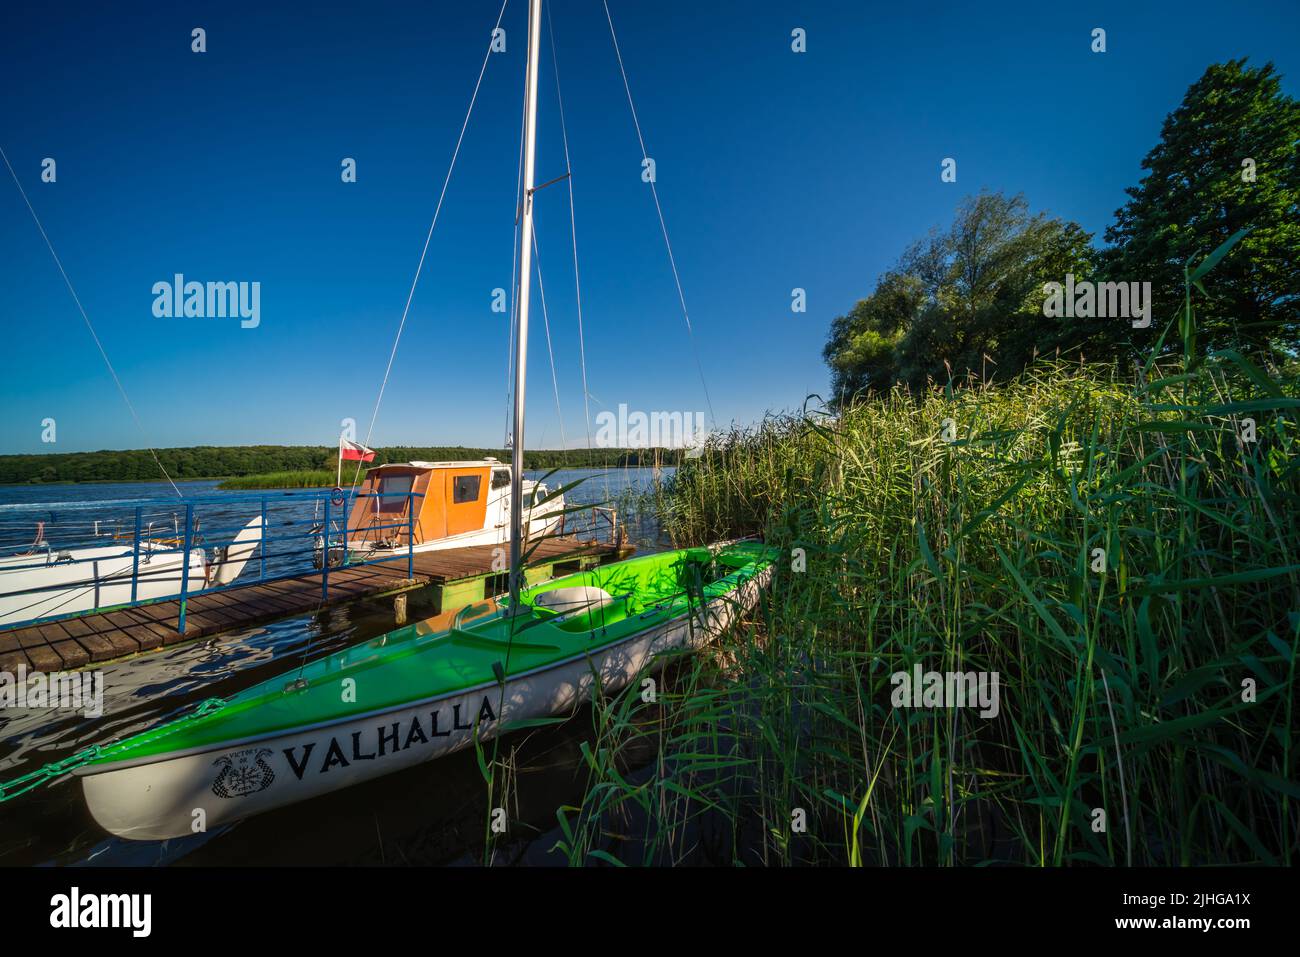 Jezioro Ostrowieckie, Poland - July 2020 : A small pier and private boats on the shore of a lake surrounded by reed and trees under the blue sky Stock Photo